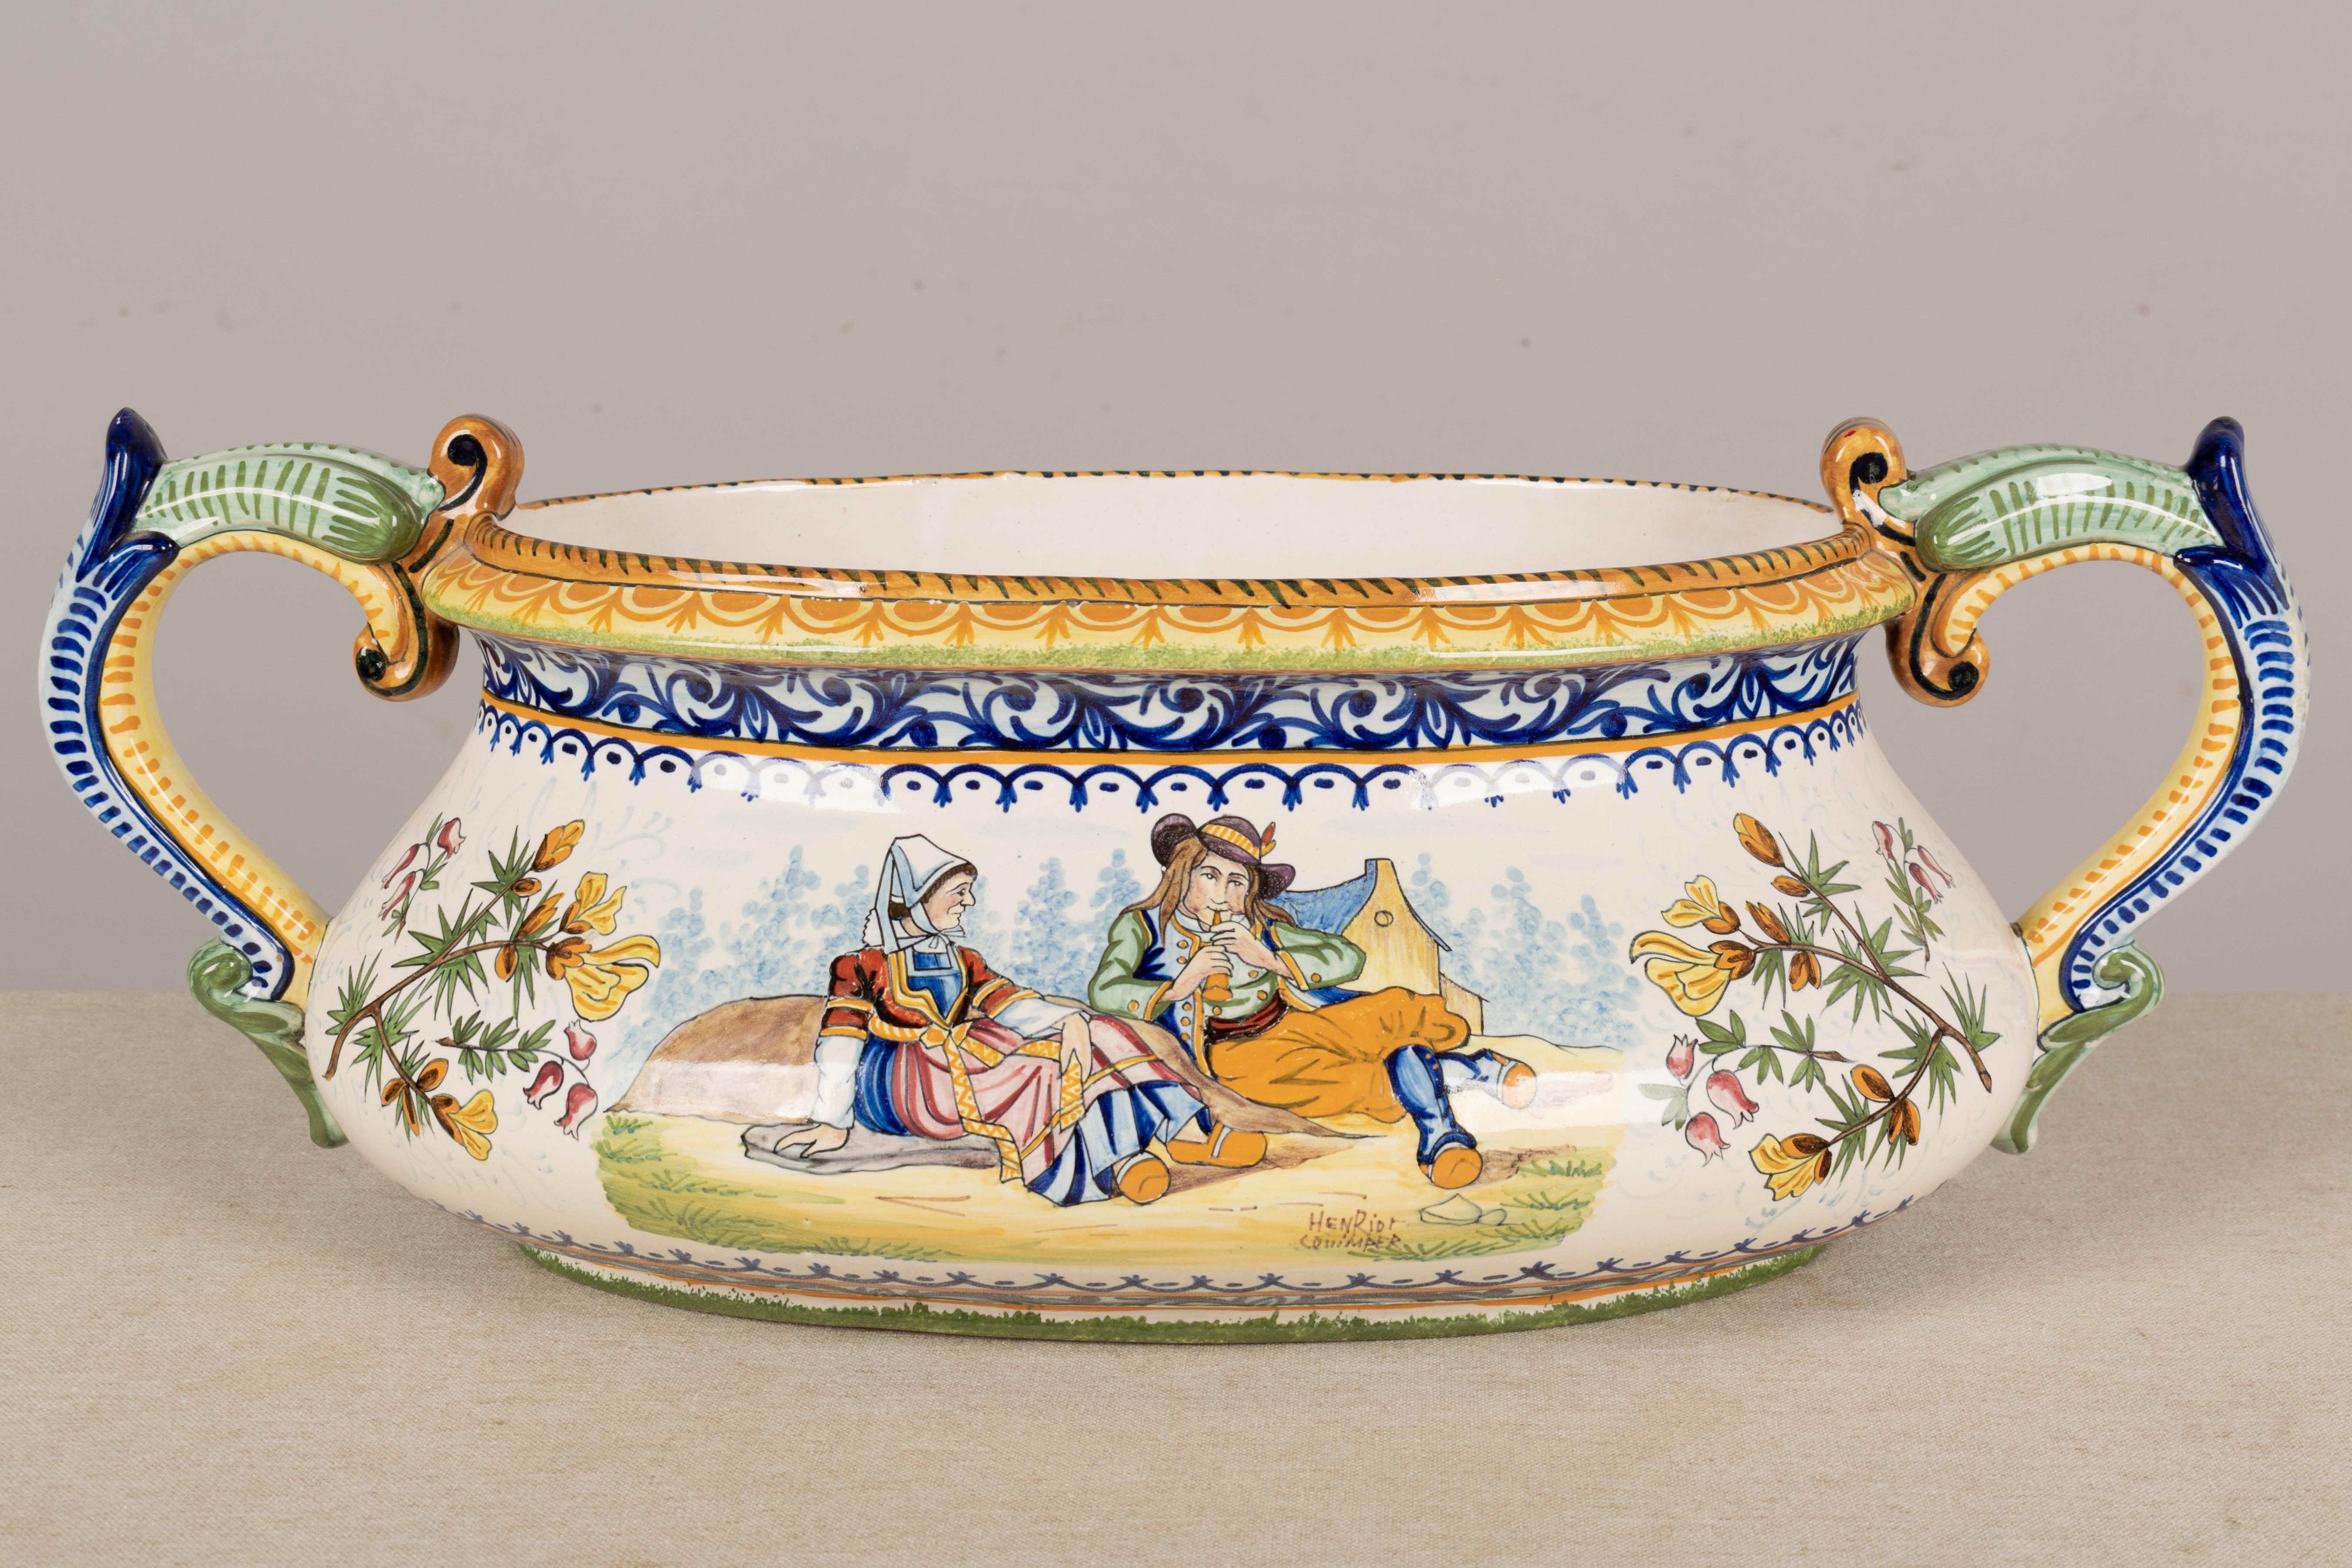 A French Henriot Quimper faience oval jardiniere, or planter, with large handles. Hand-painted decoration, one side depicting a man and woman in traditional dress, the other side with the Bretagne crest, each flanked by sprigs of flowers. Bold